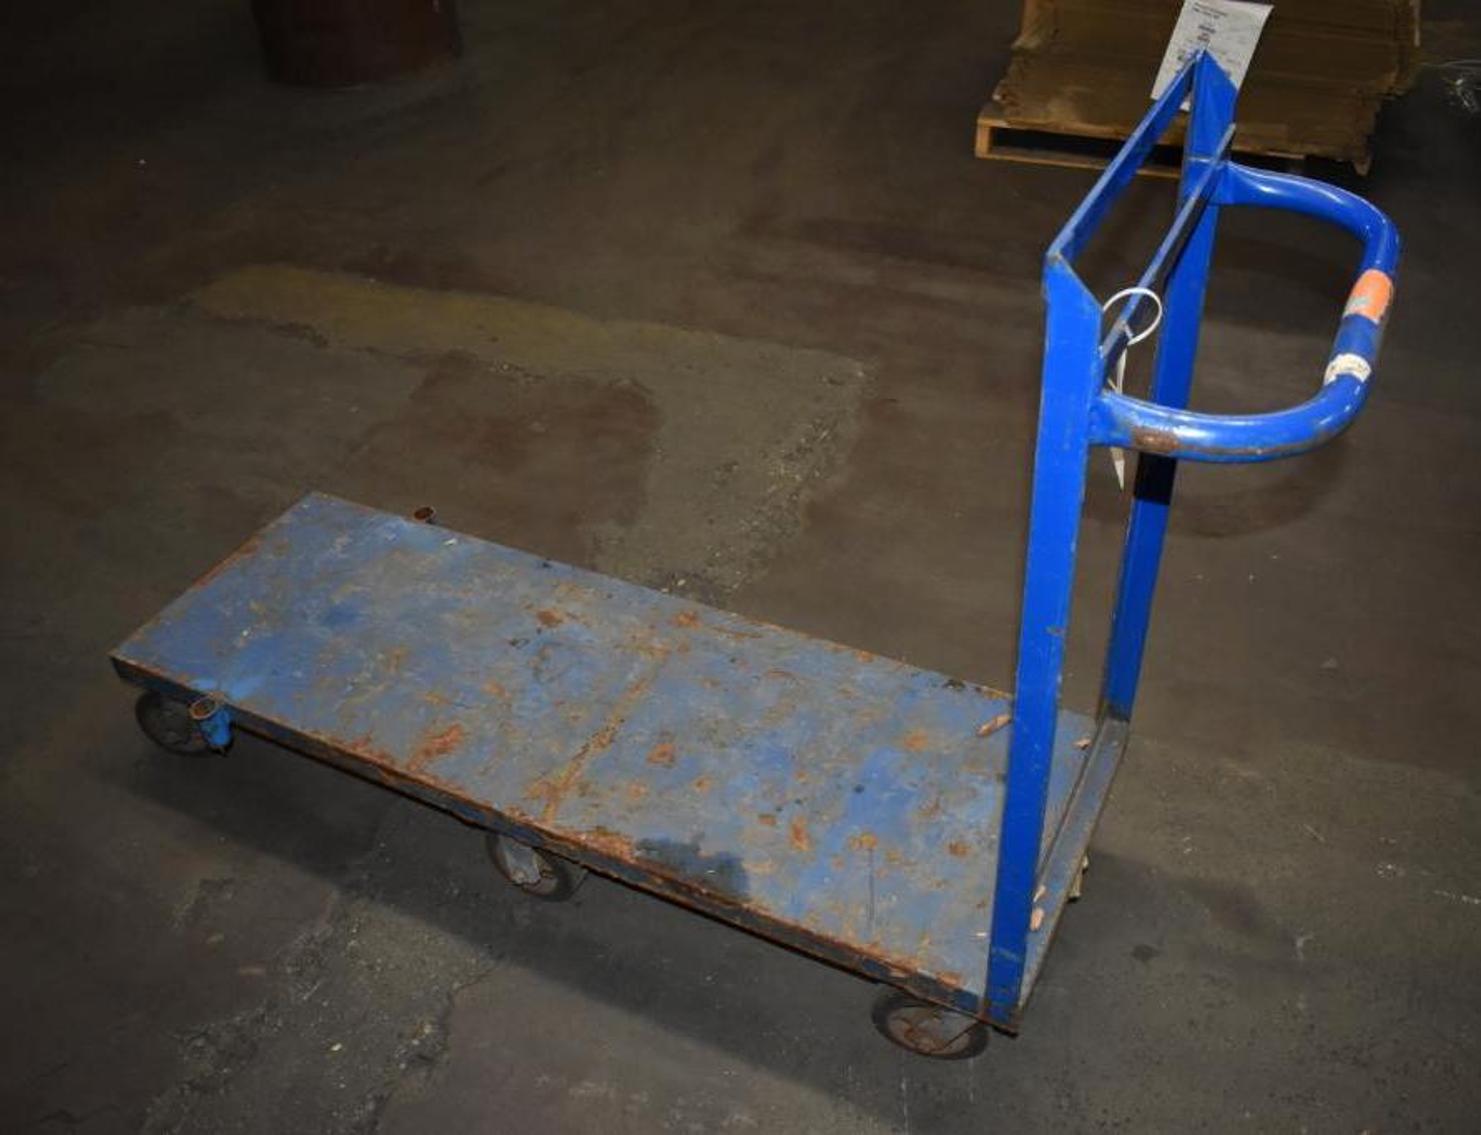 Tennant 210E Electric Sweeper, (6) Electric Pallet Jacks, Dock Plates